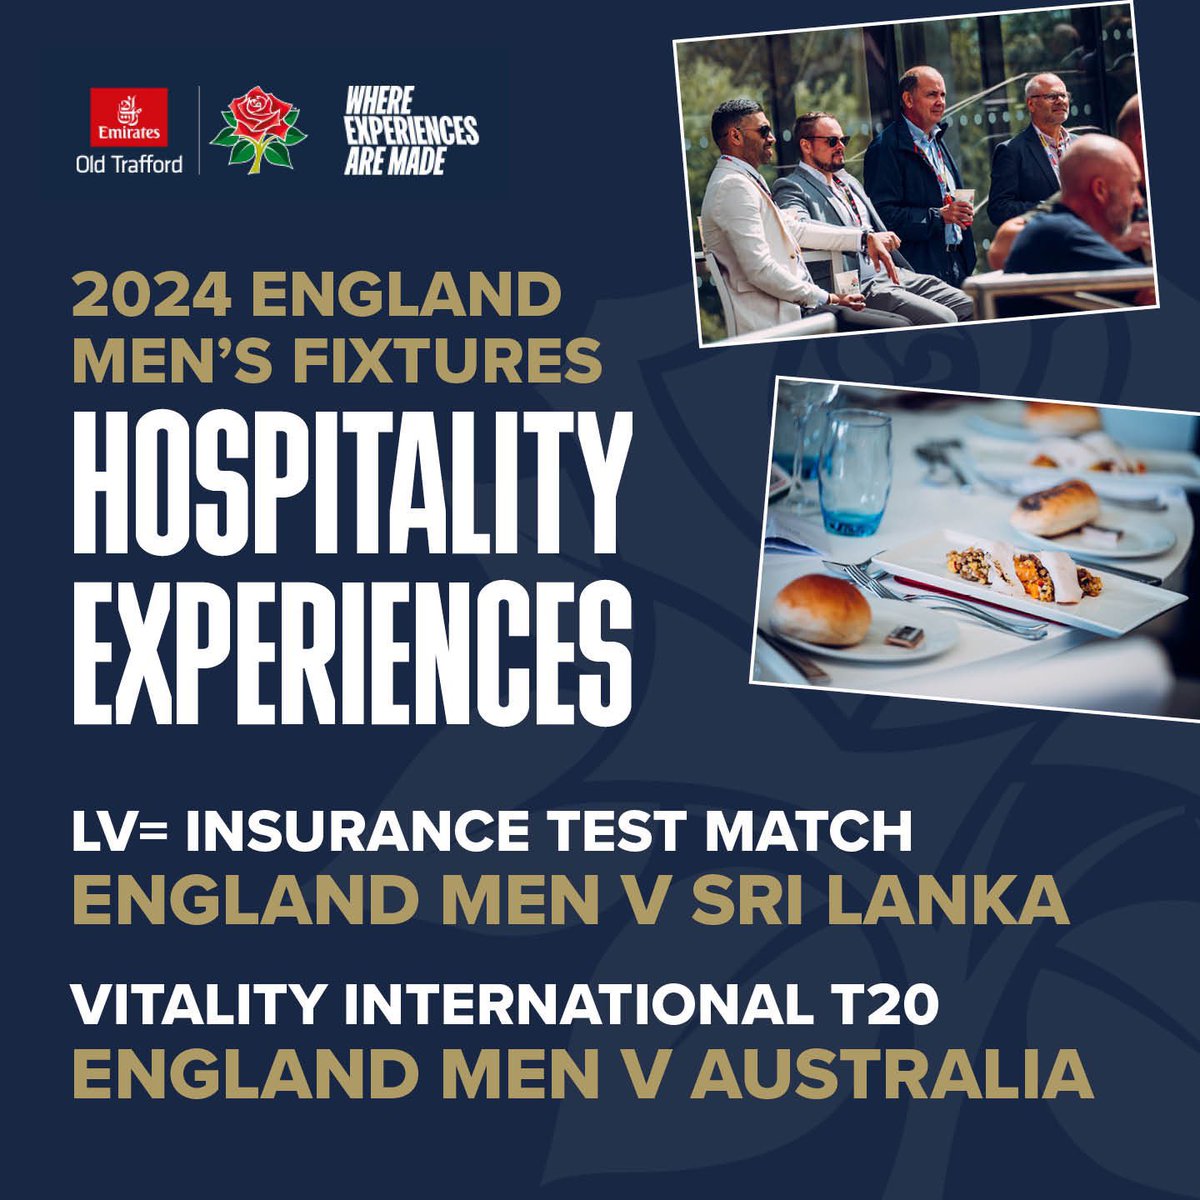 Match Day Hospitality & Premium Experiences available for this summer @EmiratesOT for the @OfficialSLC test match and @CricketAus IT20 DM for more details 🏏🏏🏏